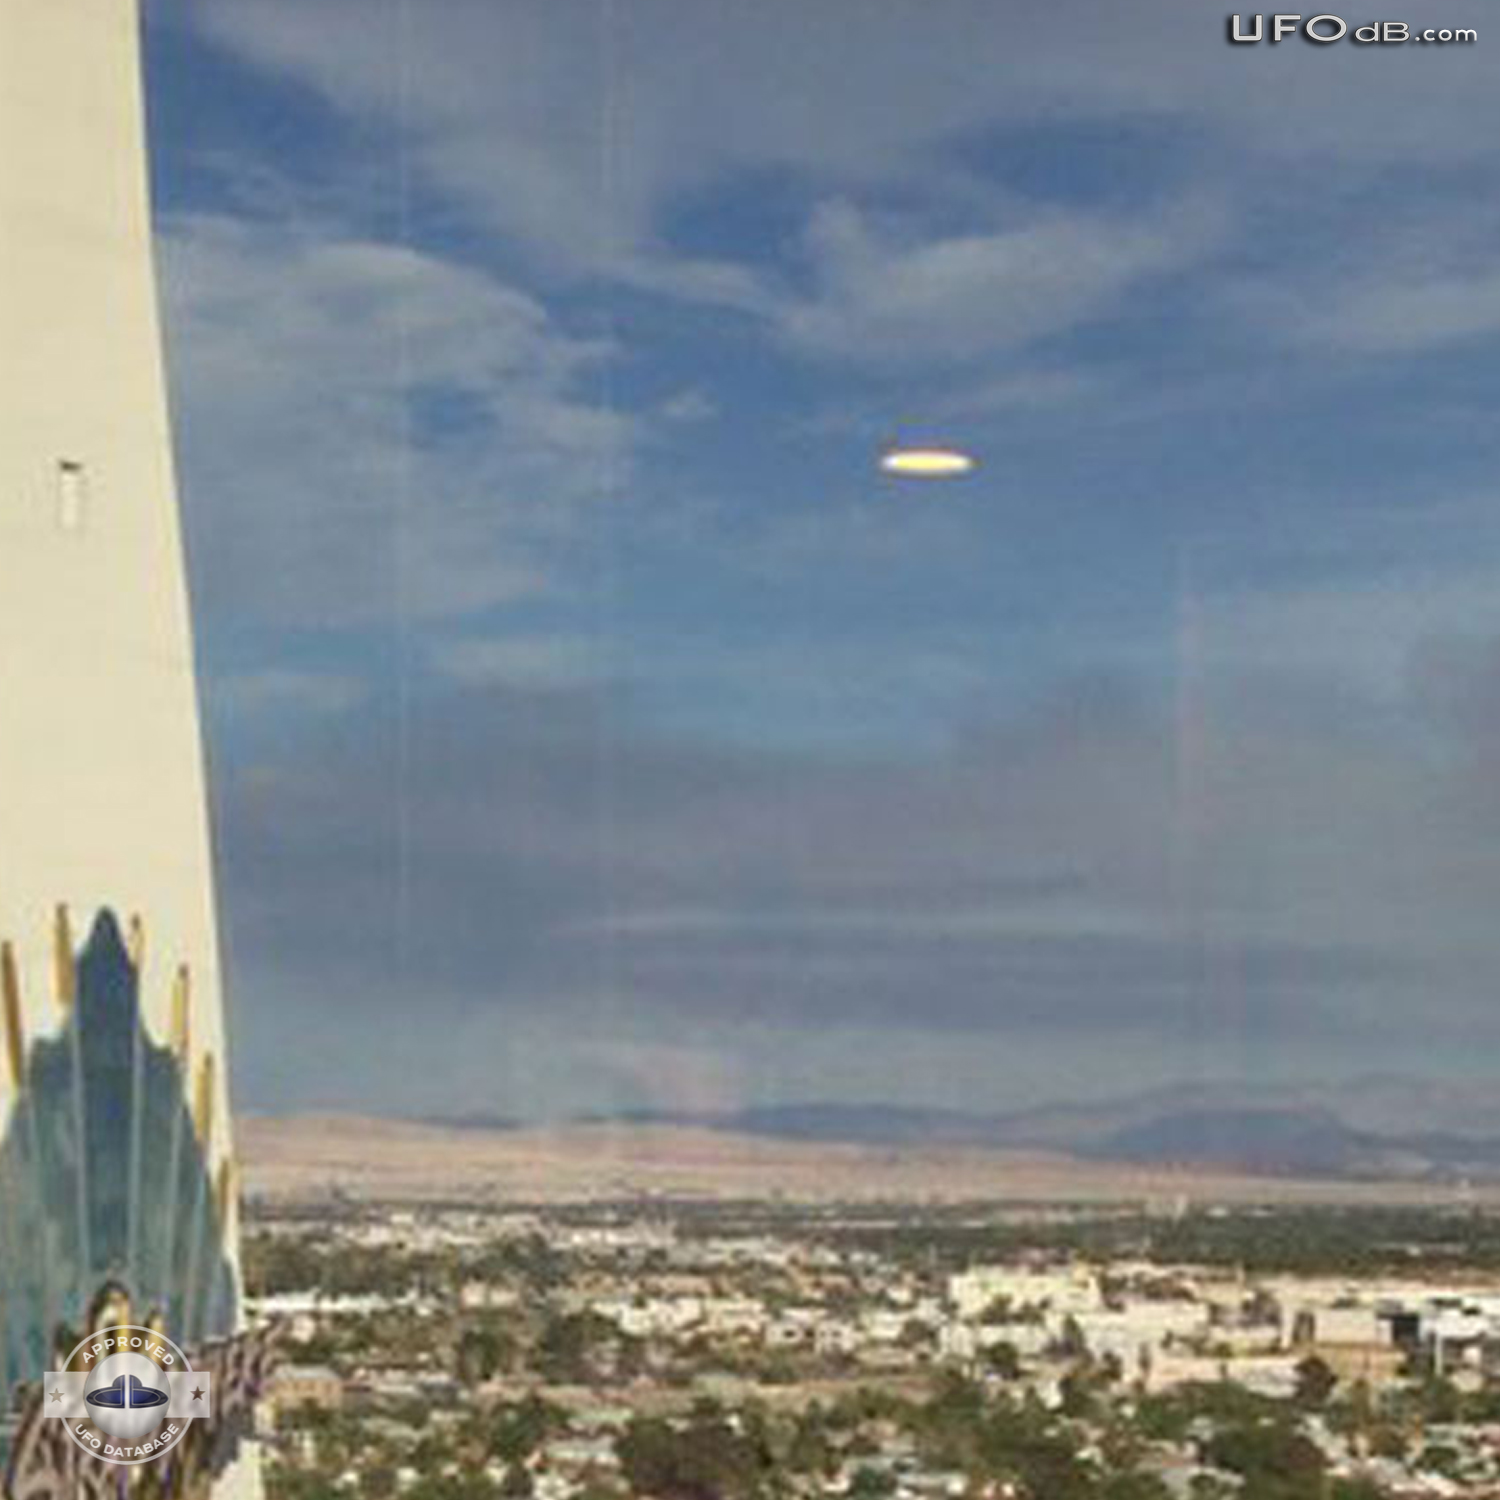 Tourist see UFO from The Stratosphere Hotel, Las Vegas | April 16 2011 UFO Picture #266-3